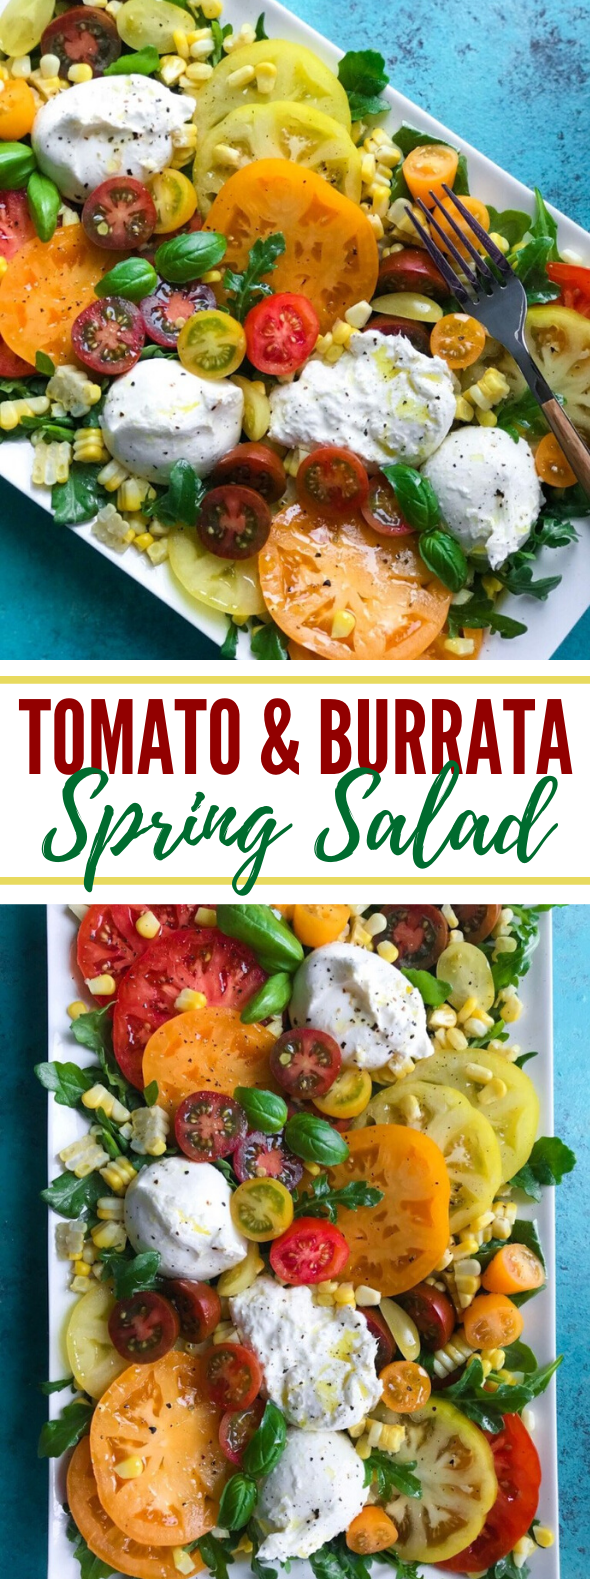 TOMATO AND BURRATA SPRING SALAD #vegetarian #appetizers